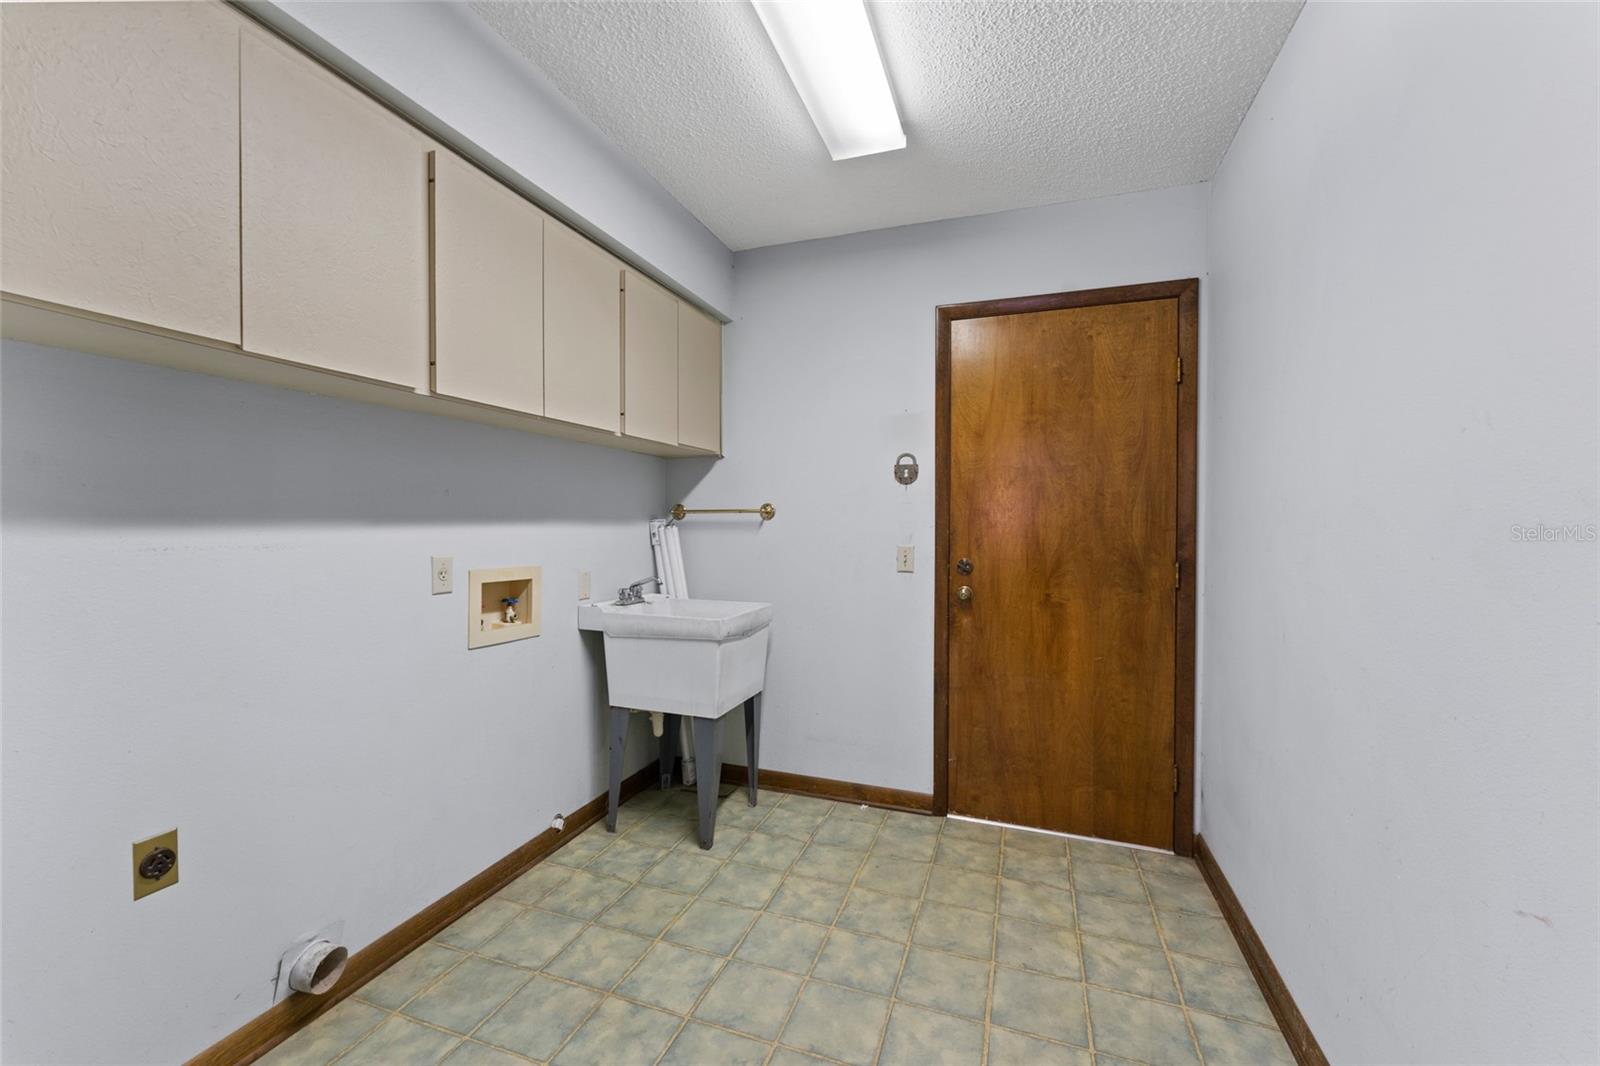 laundry room with entry door from garage